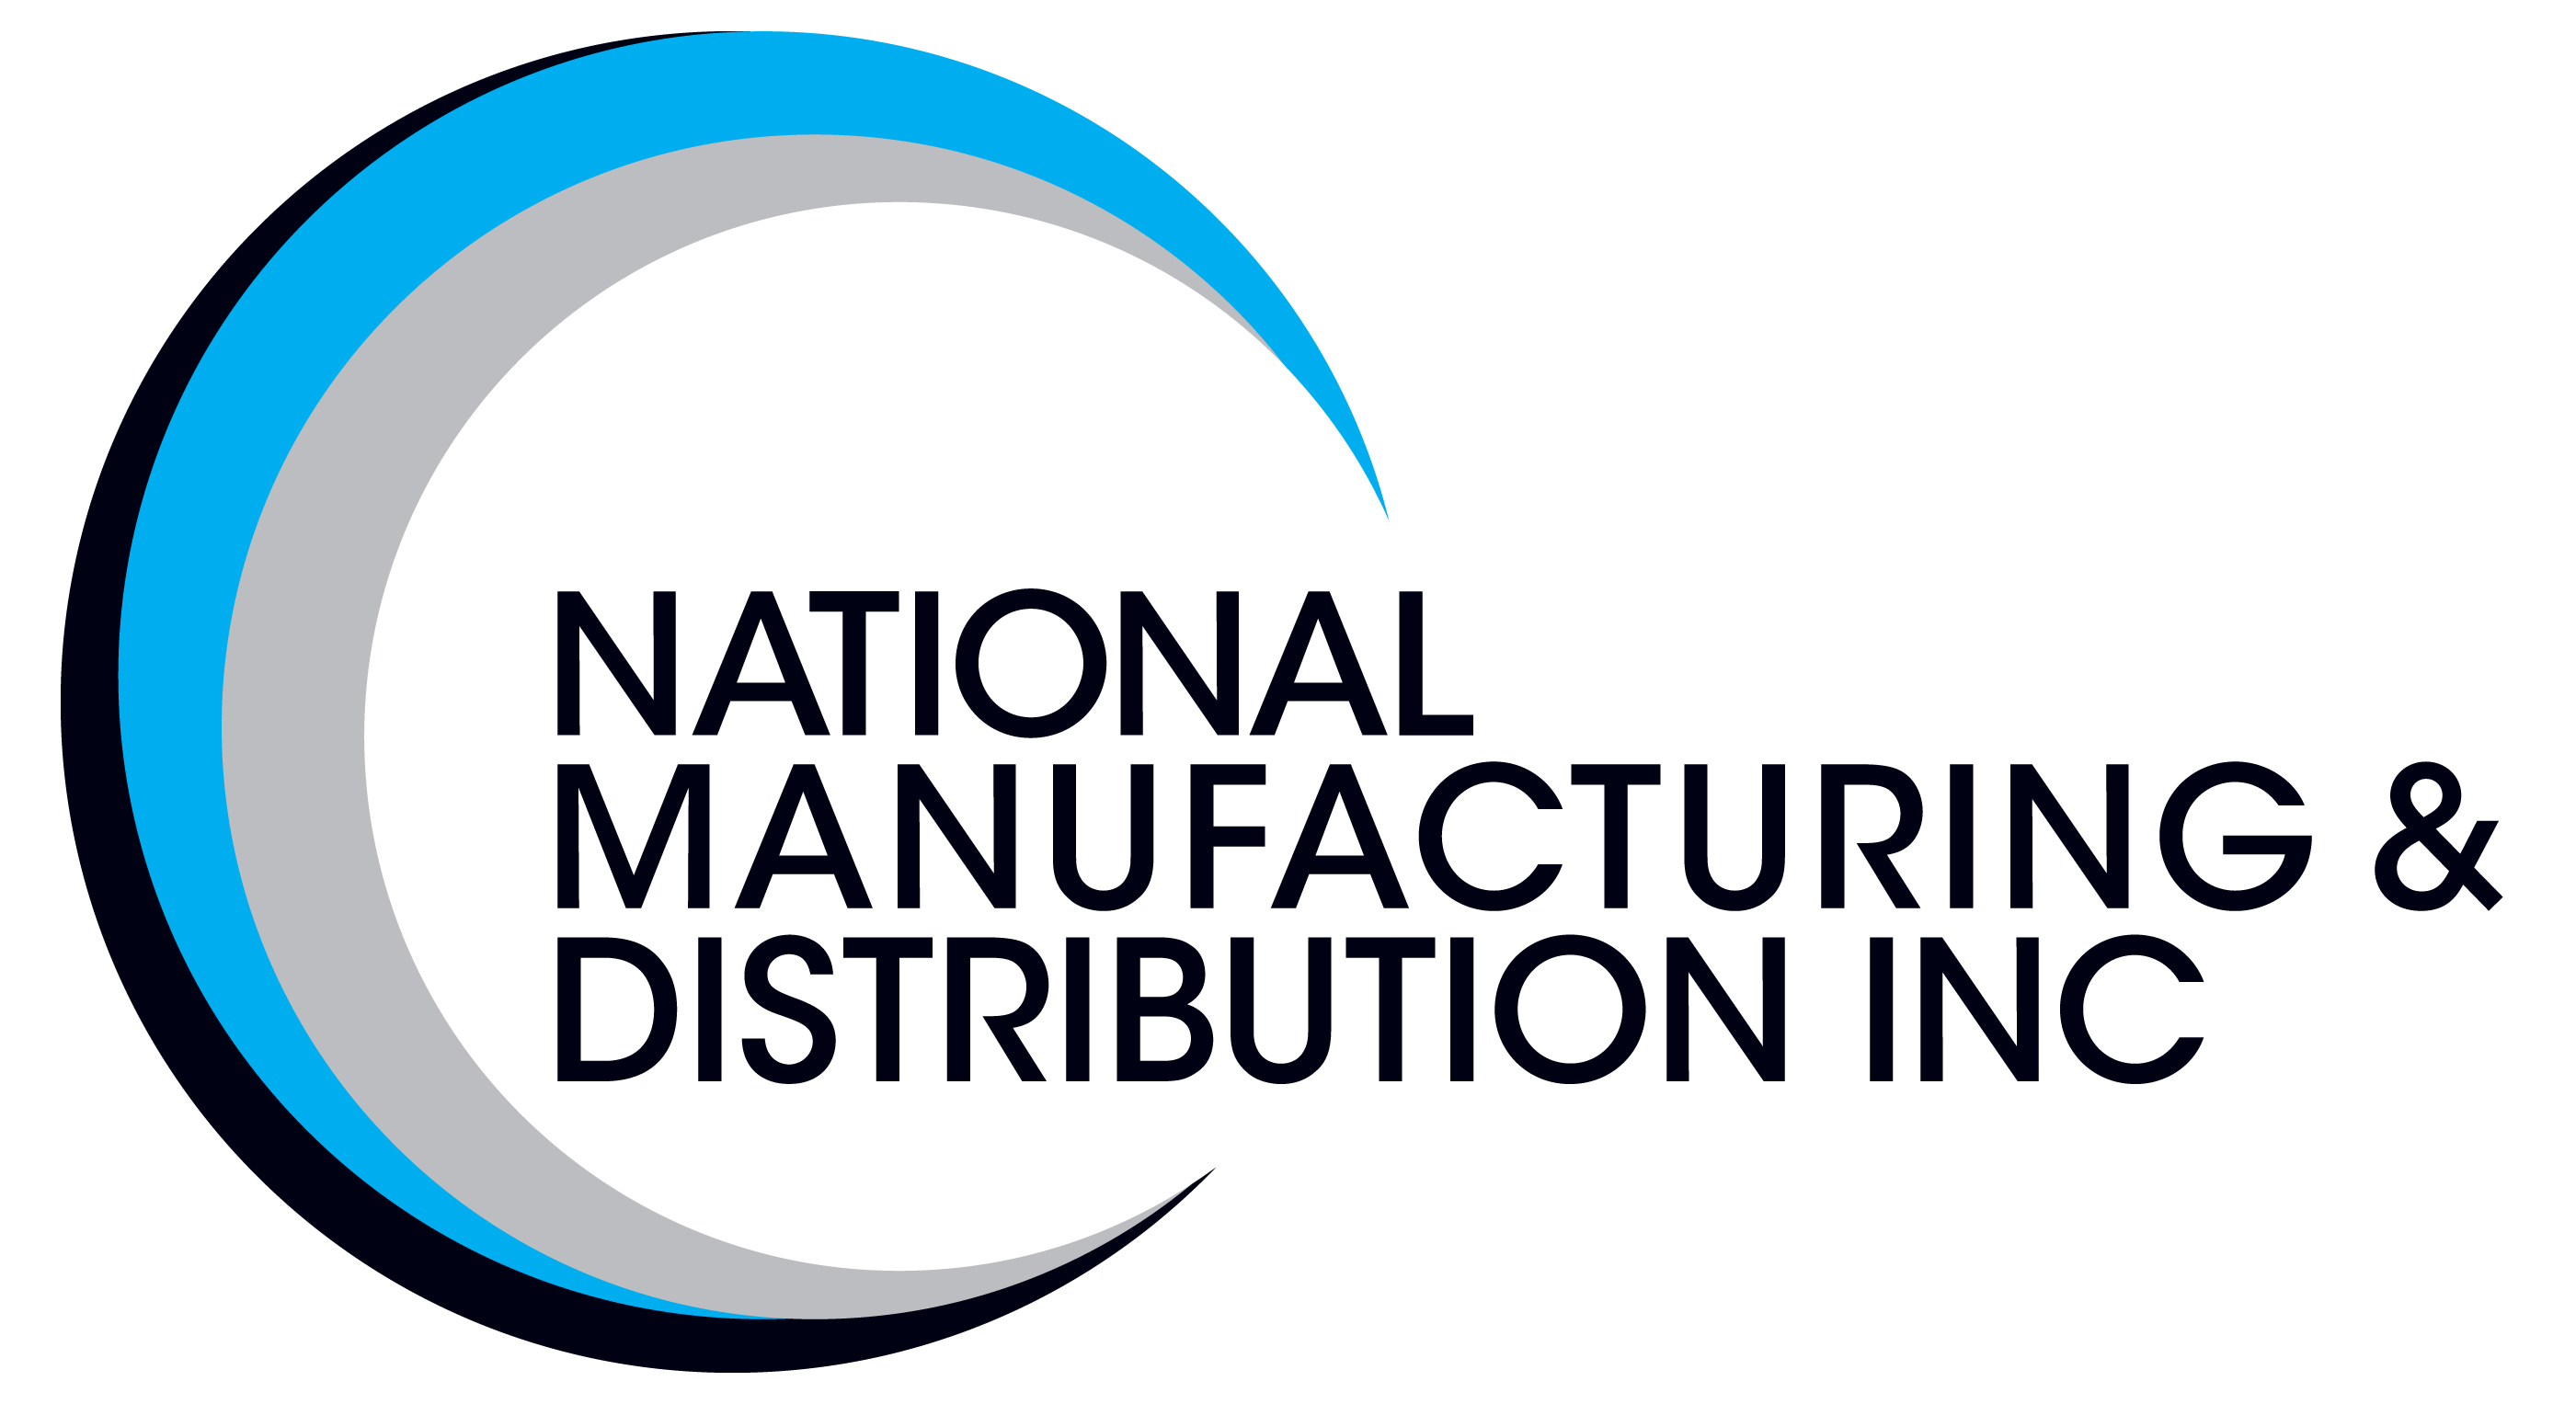 National Manufacturing & Distribution Inc. at Electricity Forum